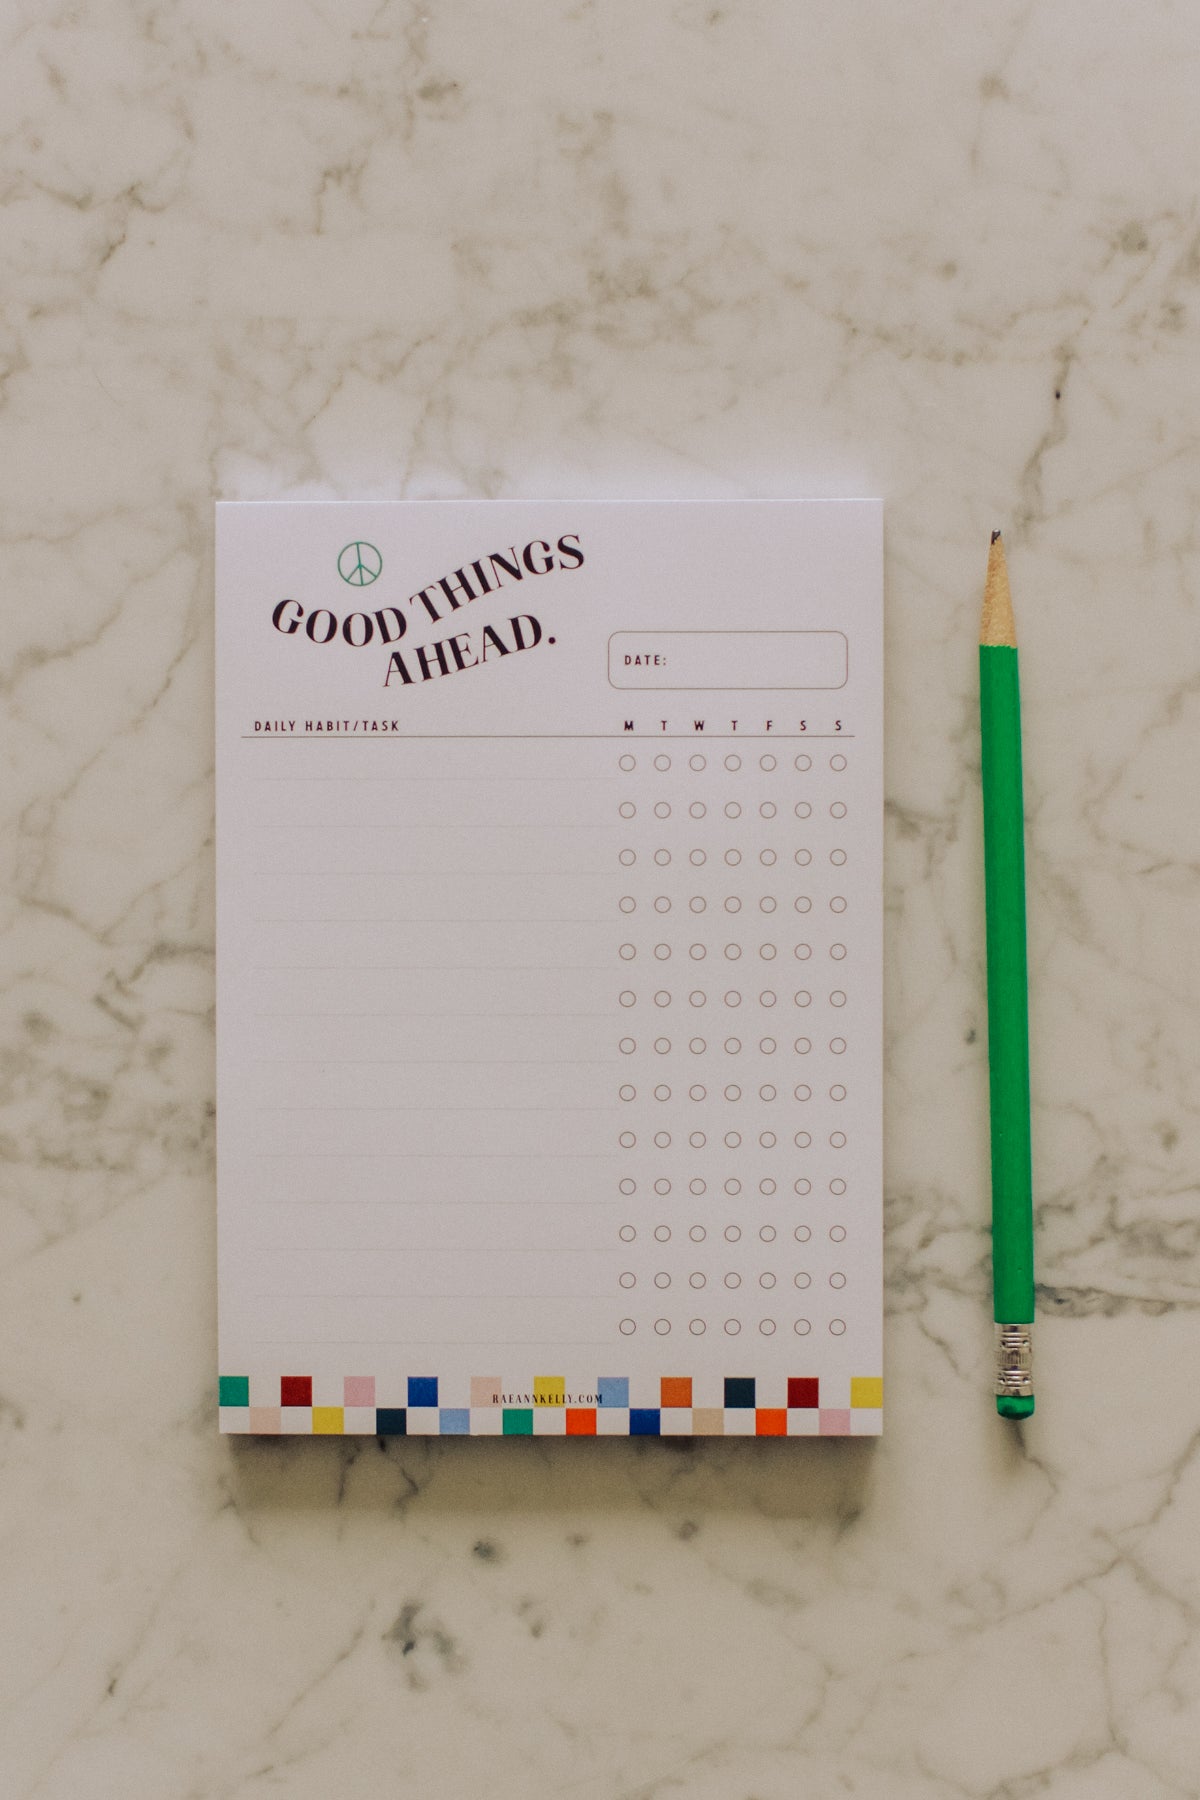 GOOD THINGS AHEAD. (WEEKLY HABIT TRACKER PAGES) – ily